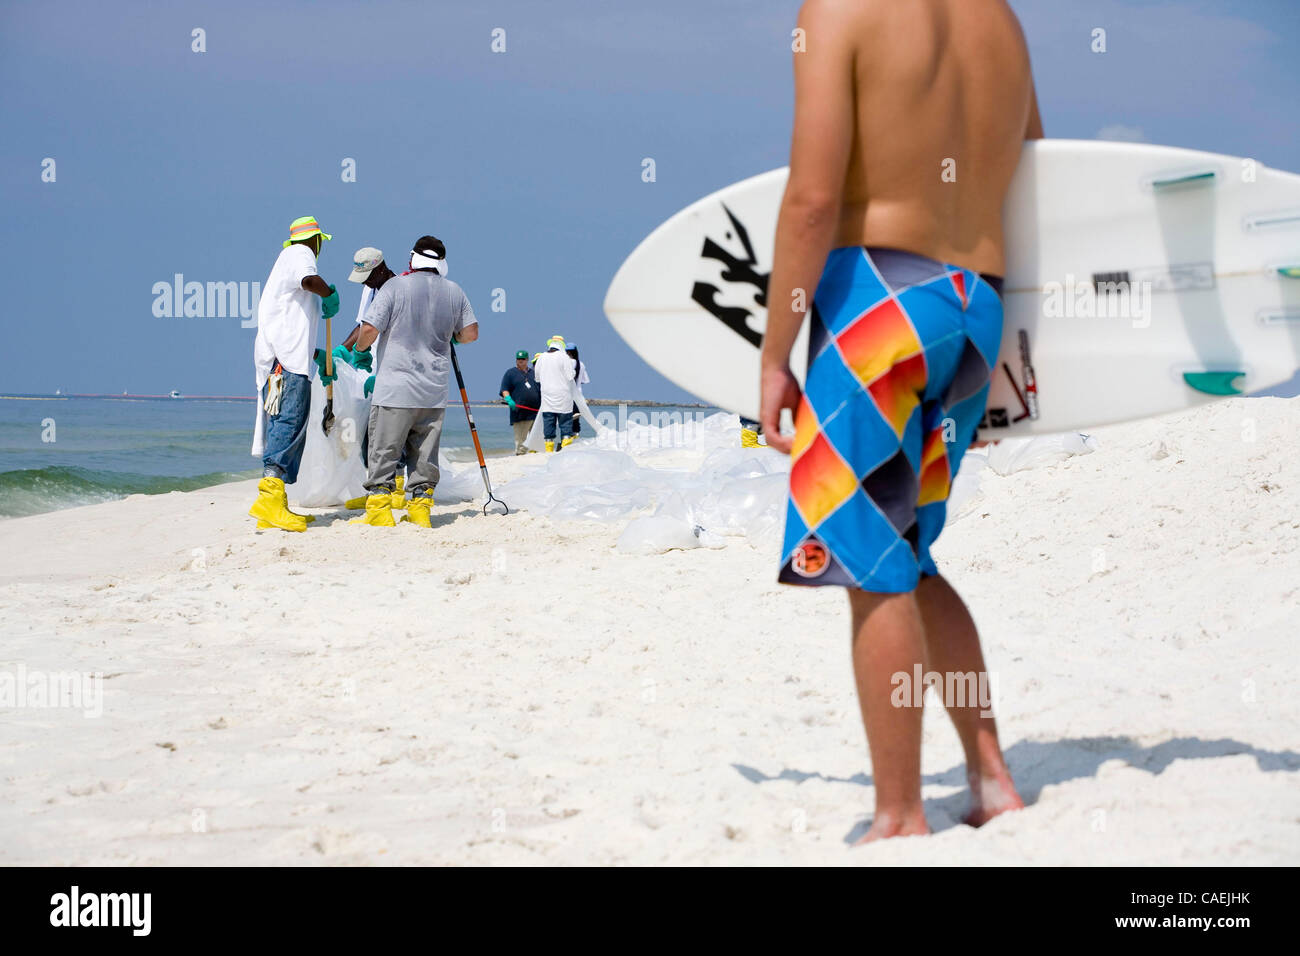 Jun 18, 2010 - Gulf Shores, Alabama, U.S. - Surfer walking through beach clean up at Gulf Shores, Alabama. The Deepwater Horizon oil spill is a massive ongoing oil spill in the Gulf of Mexico, now considered the largest offshore spill in U.S. history. The spill stems from a sea floor oil gusher that Stock Photo